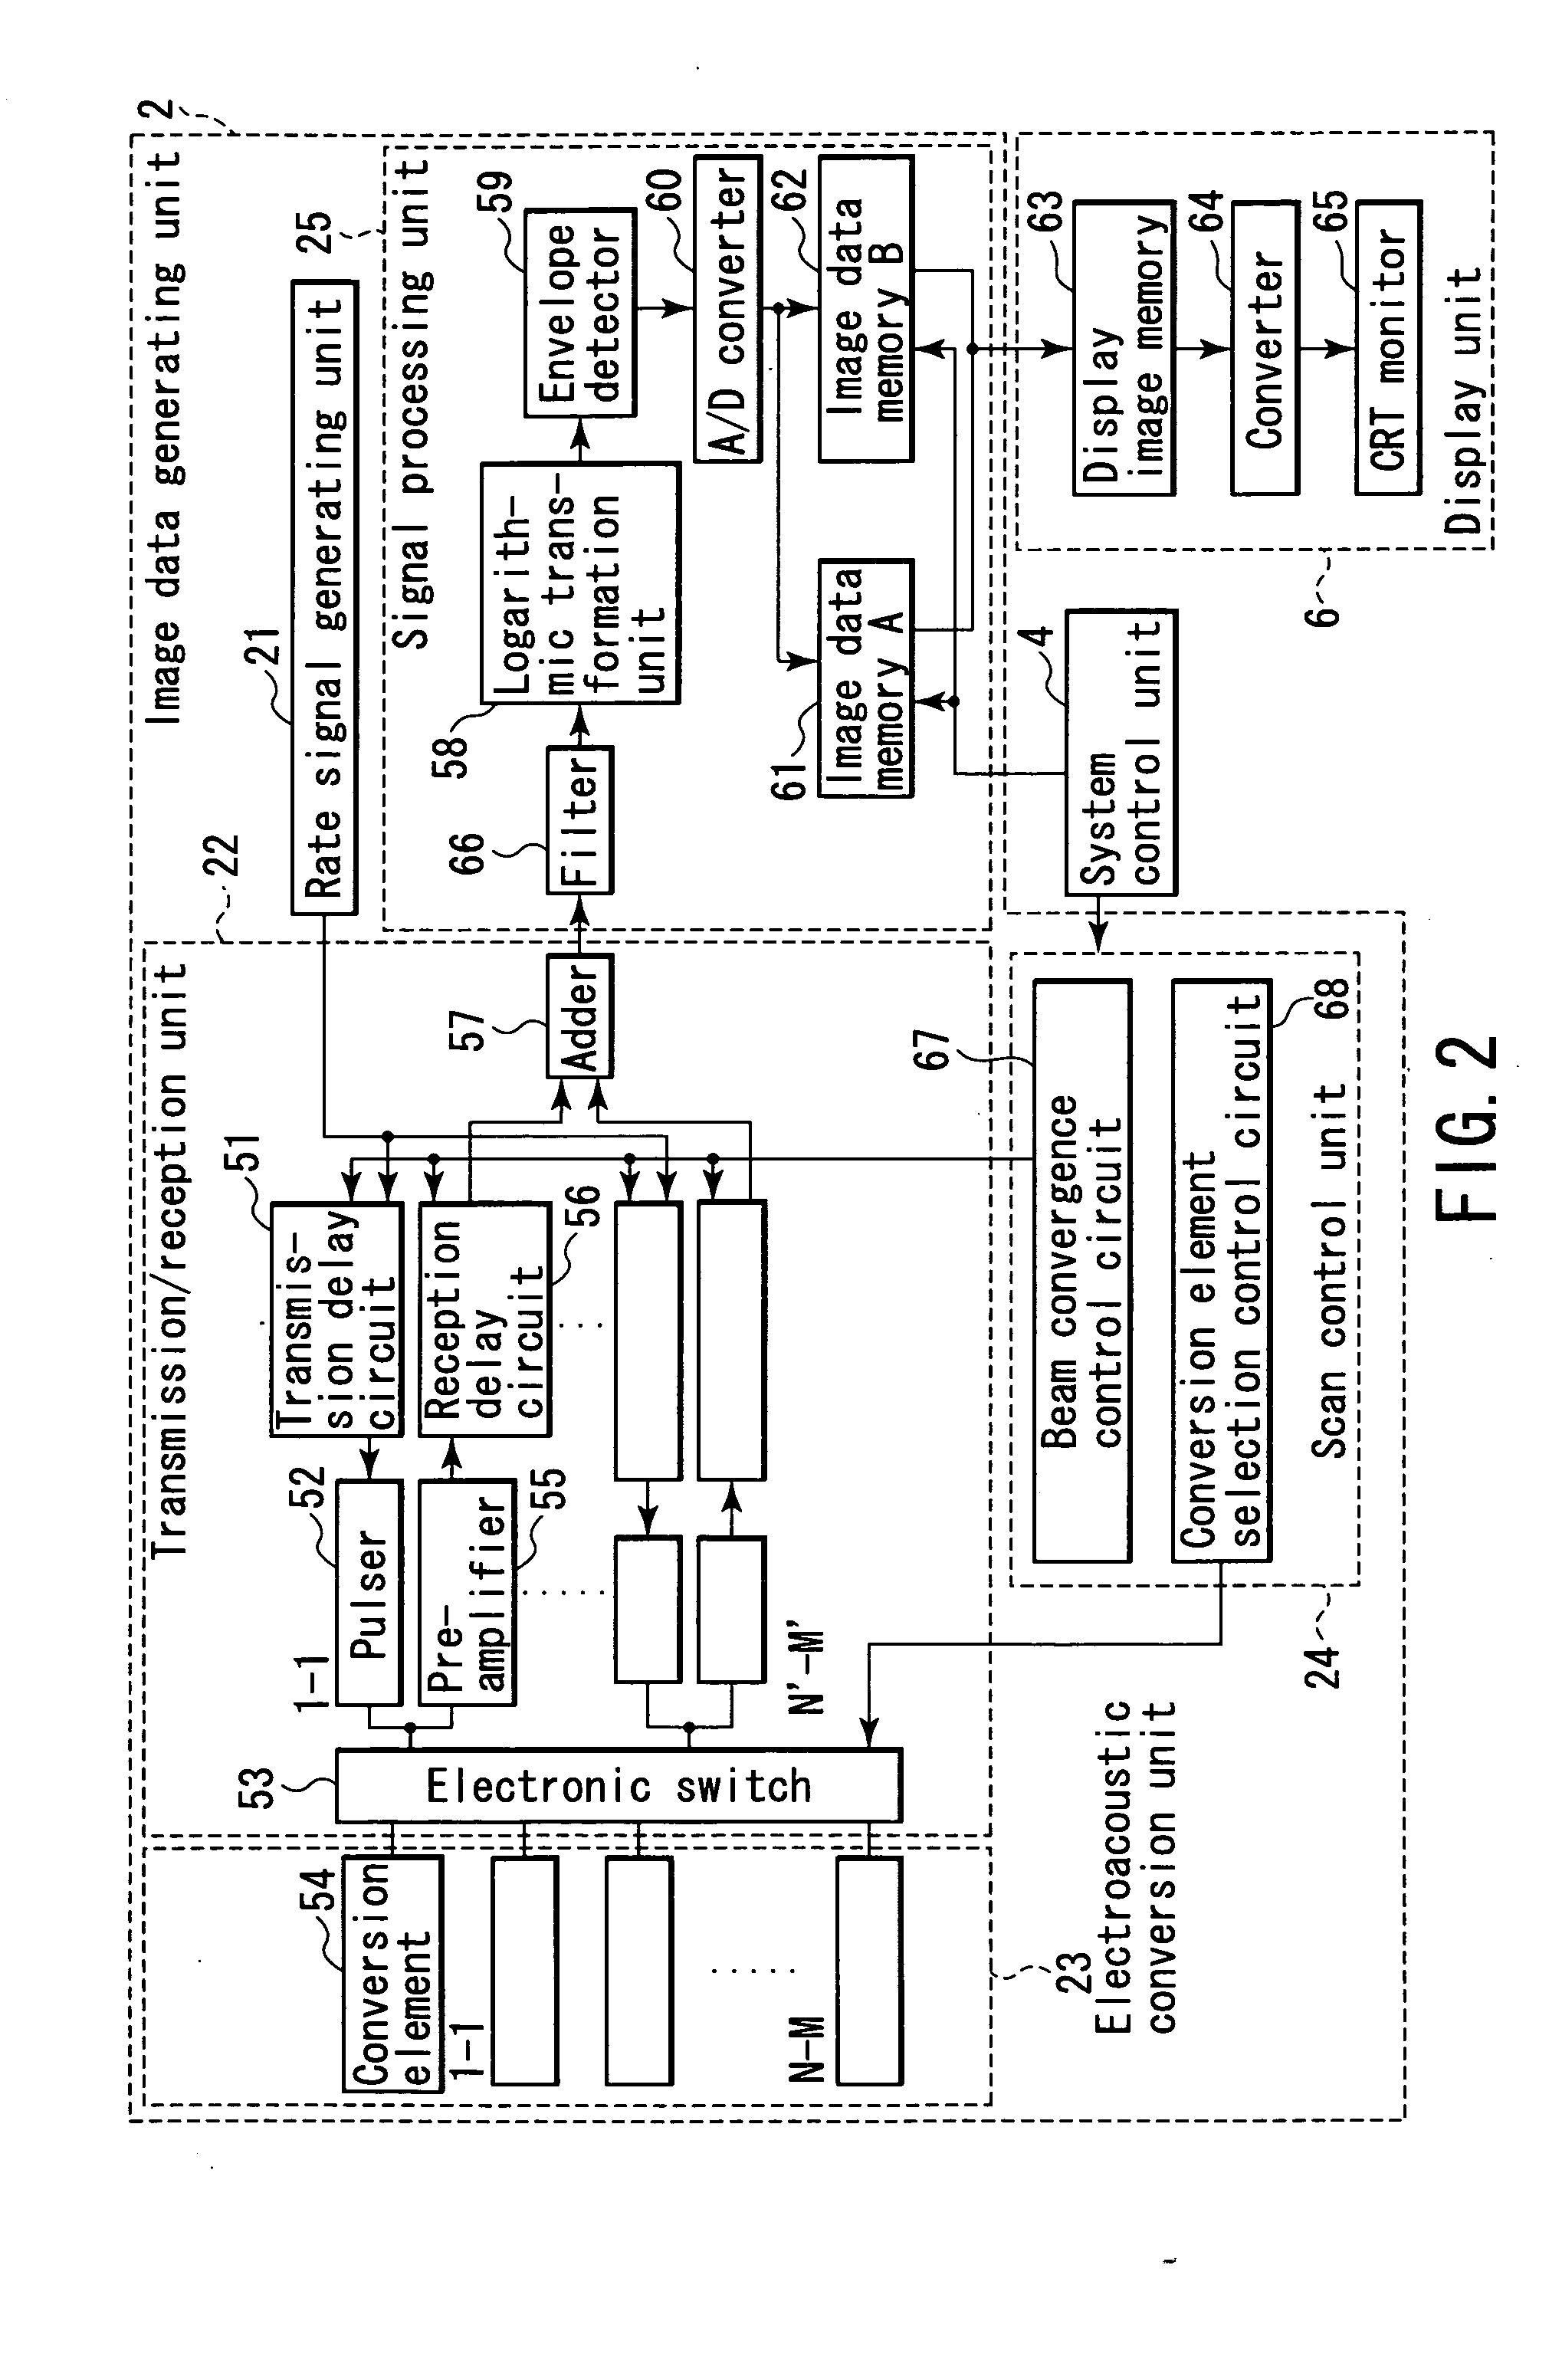 Non-invasive subject-information imaging method and apparatus